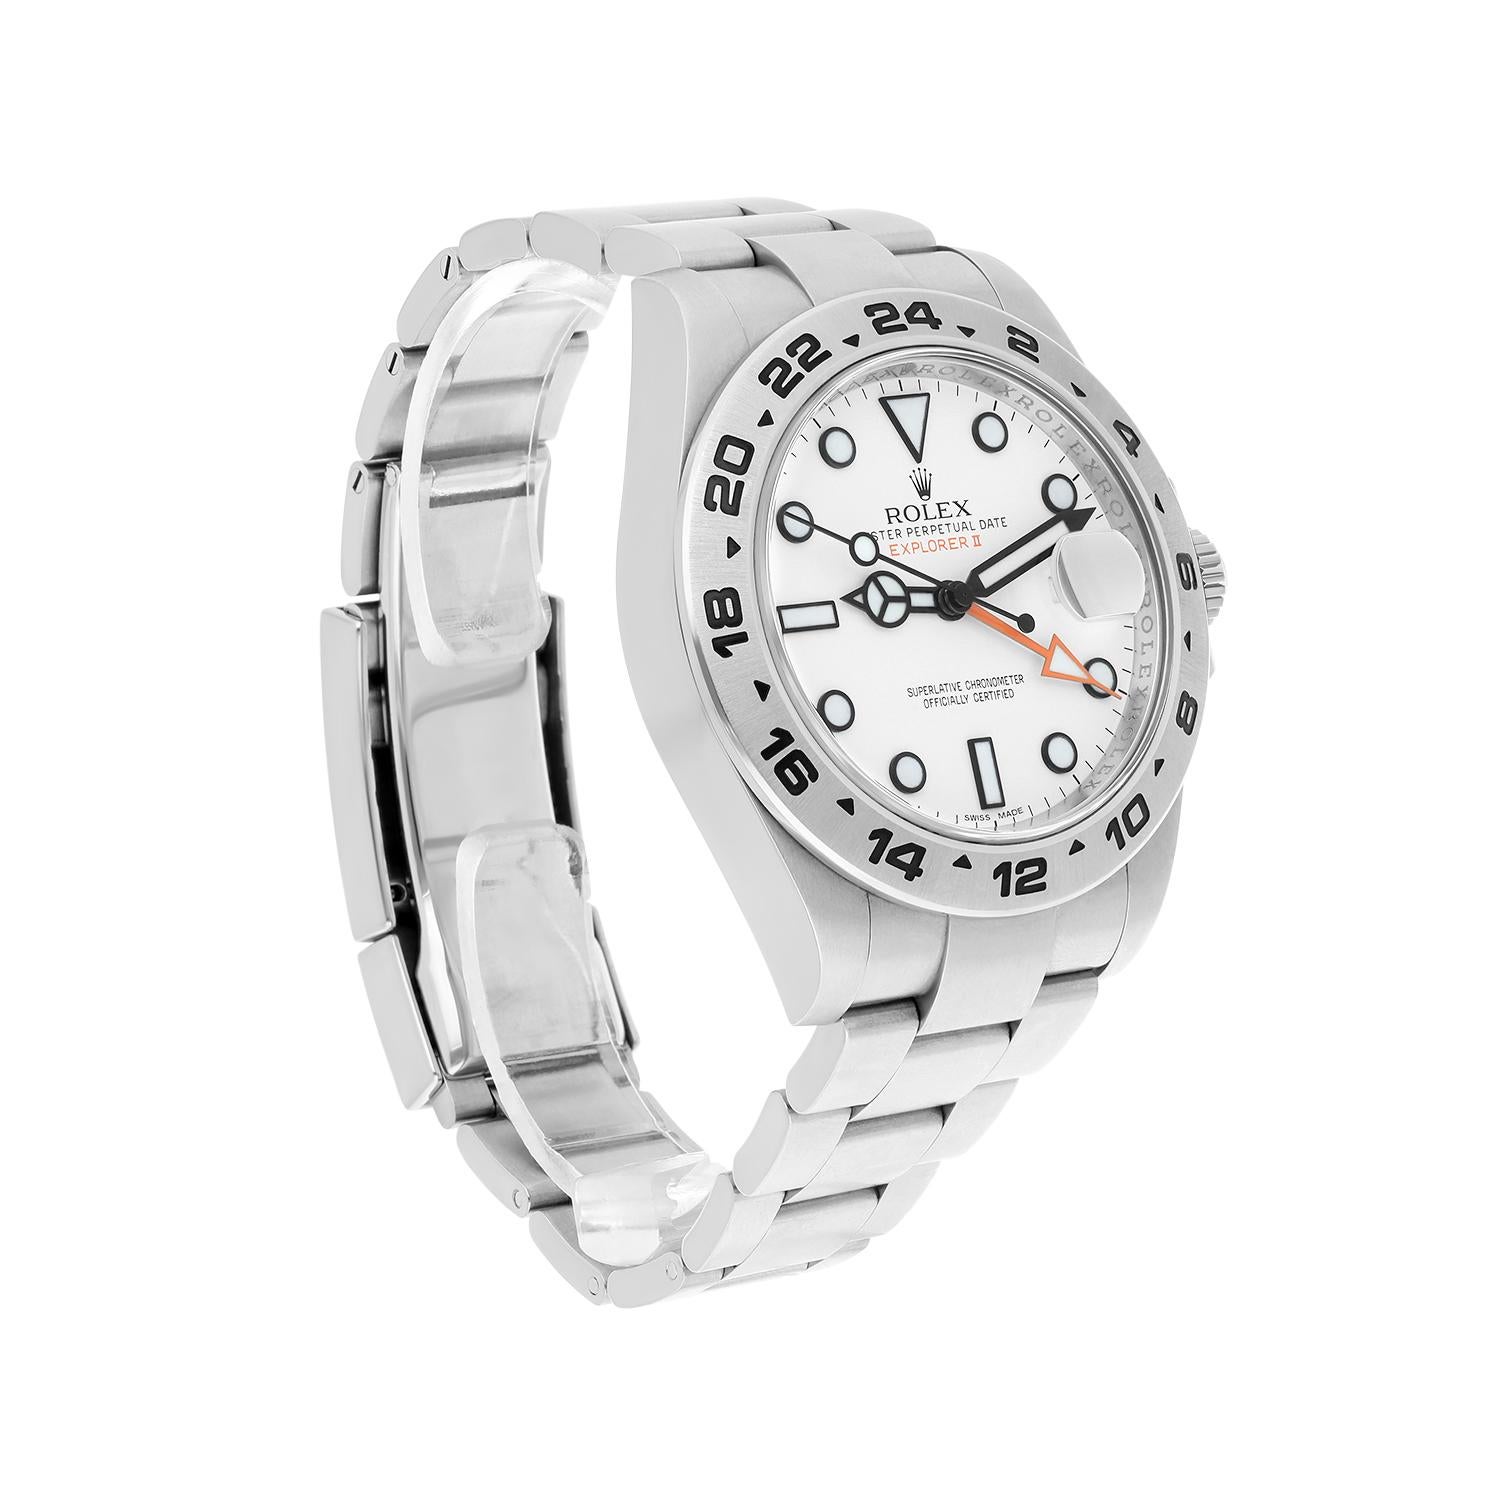 Modern Rolex Explorer II 216570 White Dial Stainless Steel Mens Watch For Sale